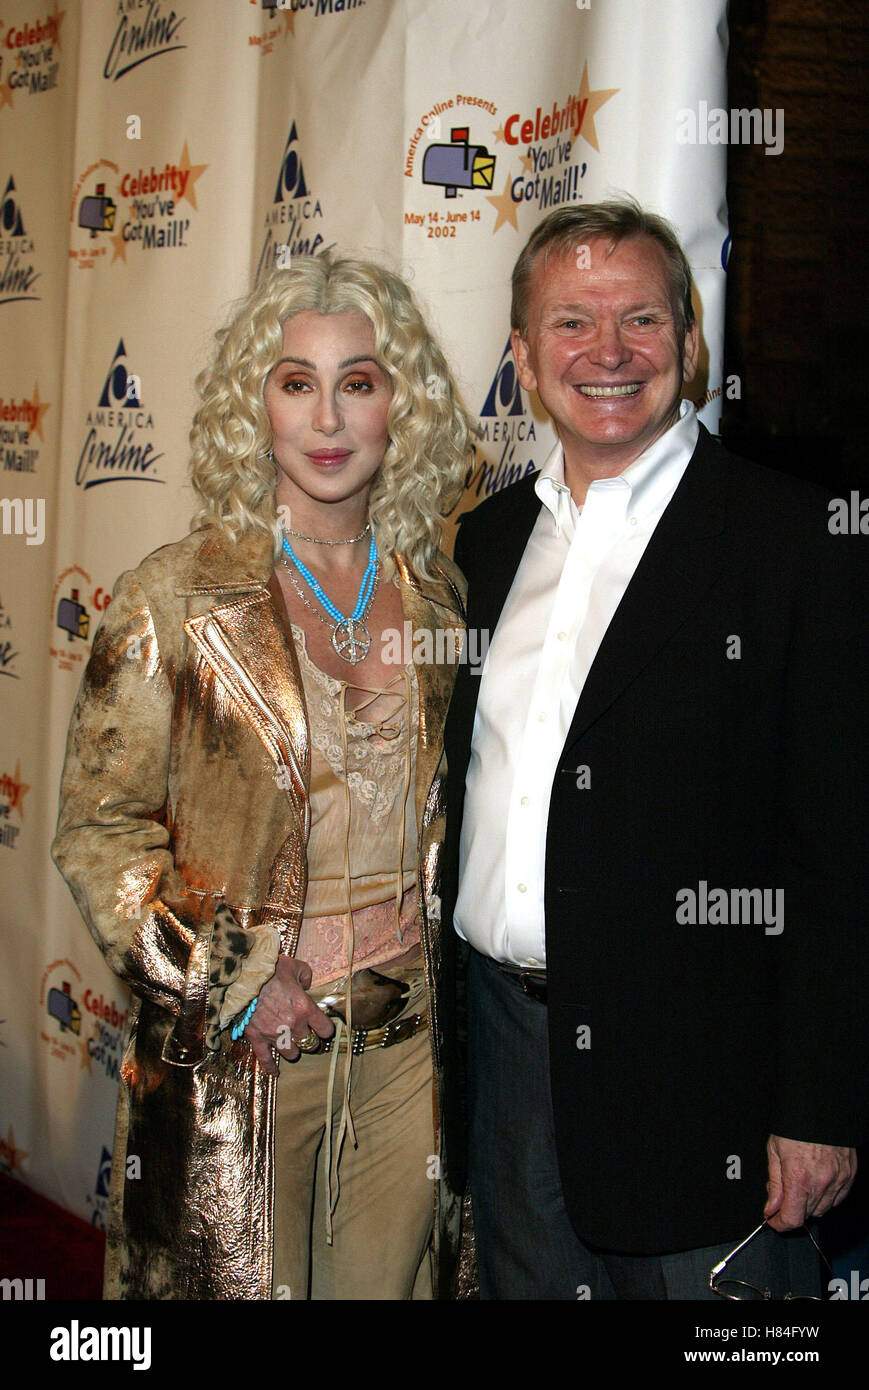 CHER & BOB MACKIE AOL 'CELEBRITY YOU'VE GOT MAIL THE HIGHLANDS HOLLYWOOD HOLLYWOOD LOS ANGELES USA 14 May 2002 Stock Photo